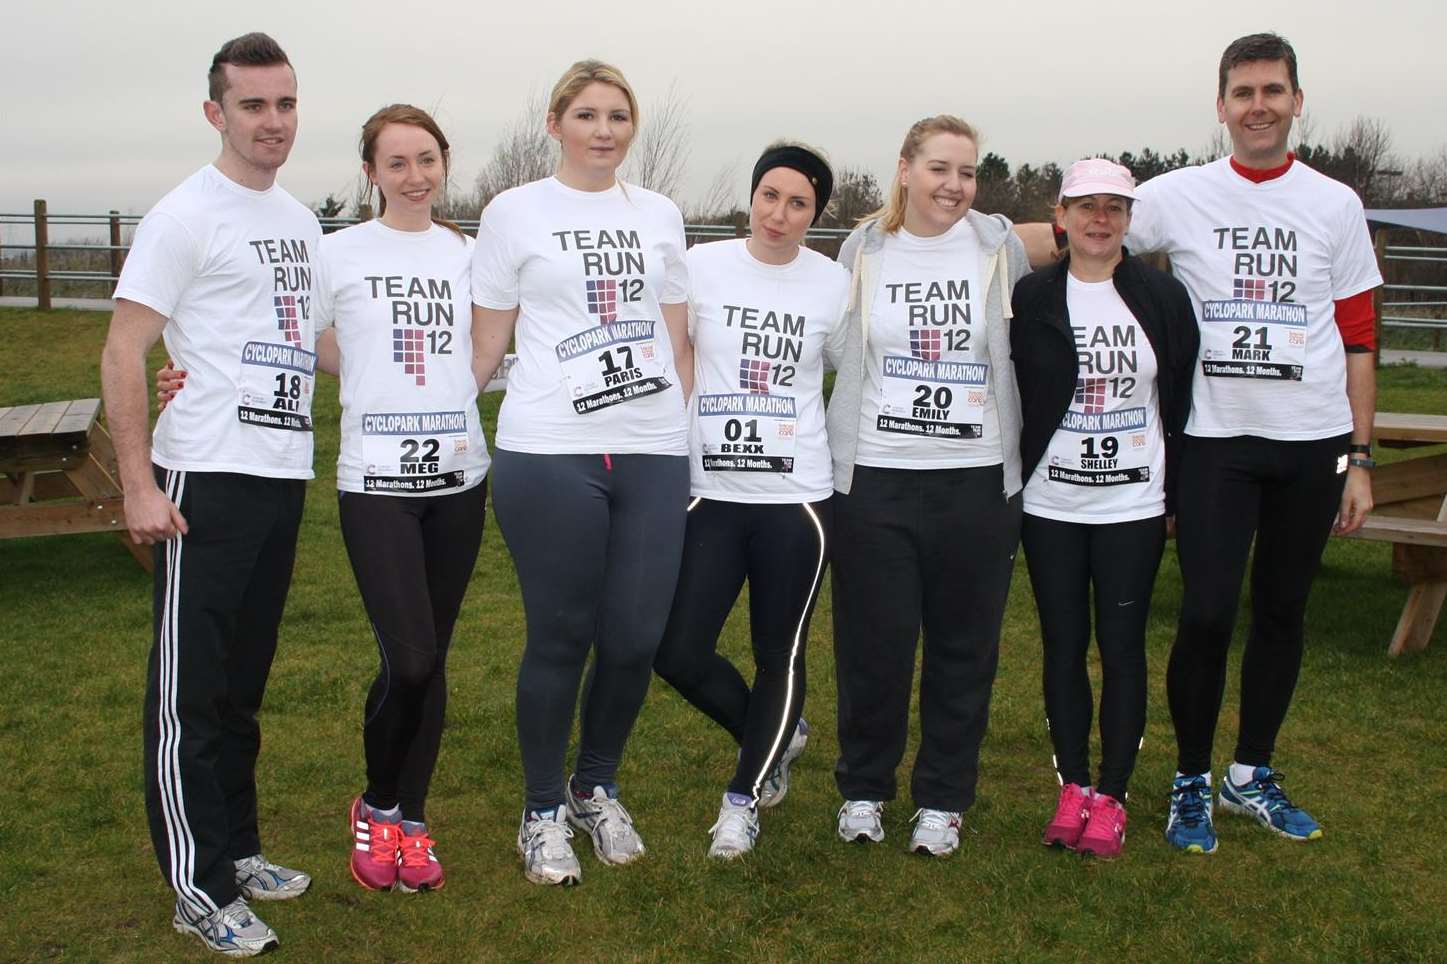 Rebecca with members of Team Run 12 at her first marathon at Gravesend Cyclopark in January.